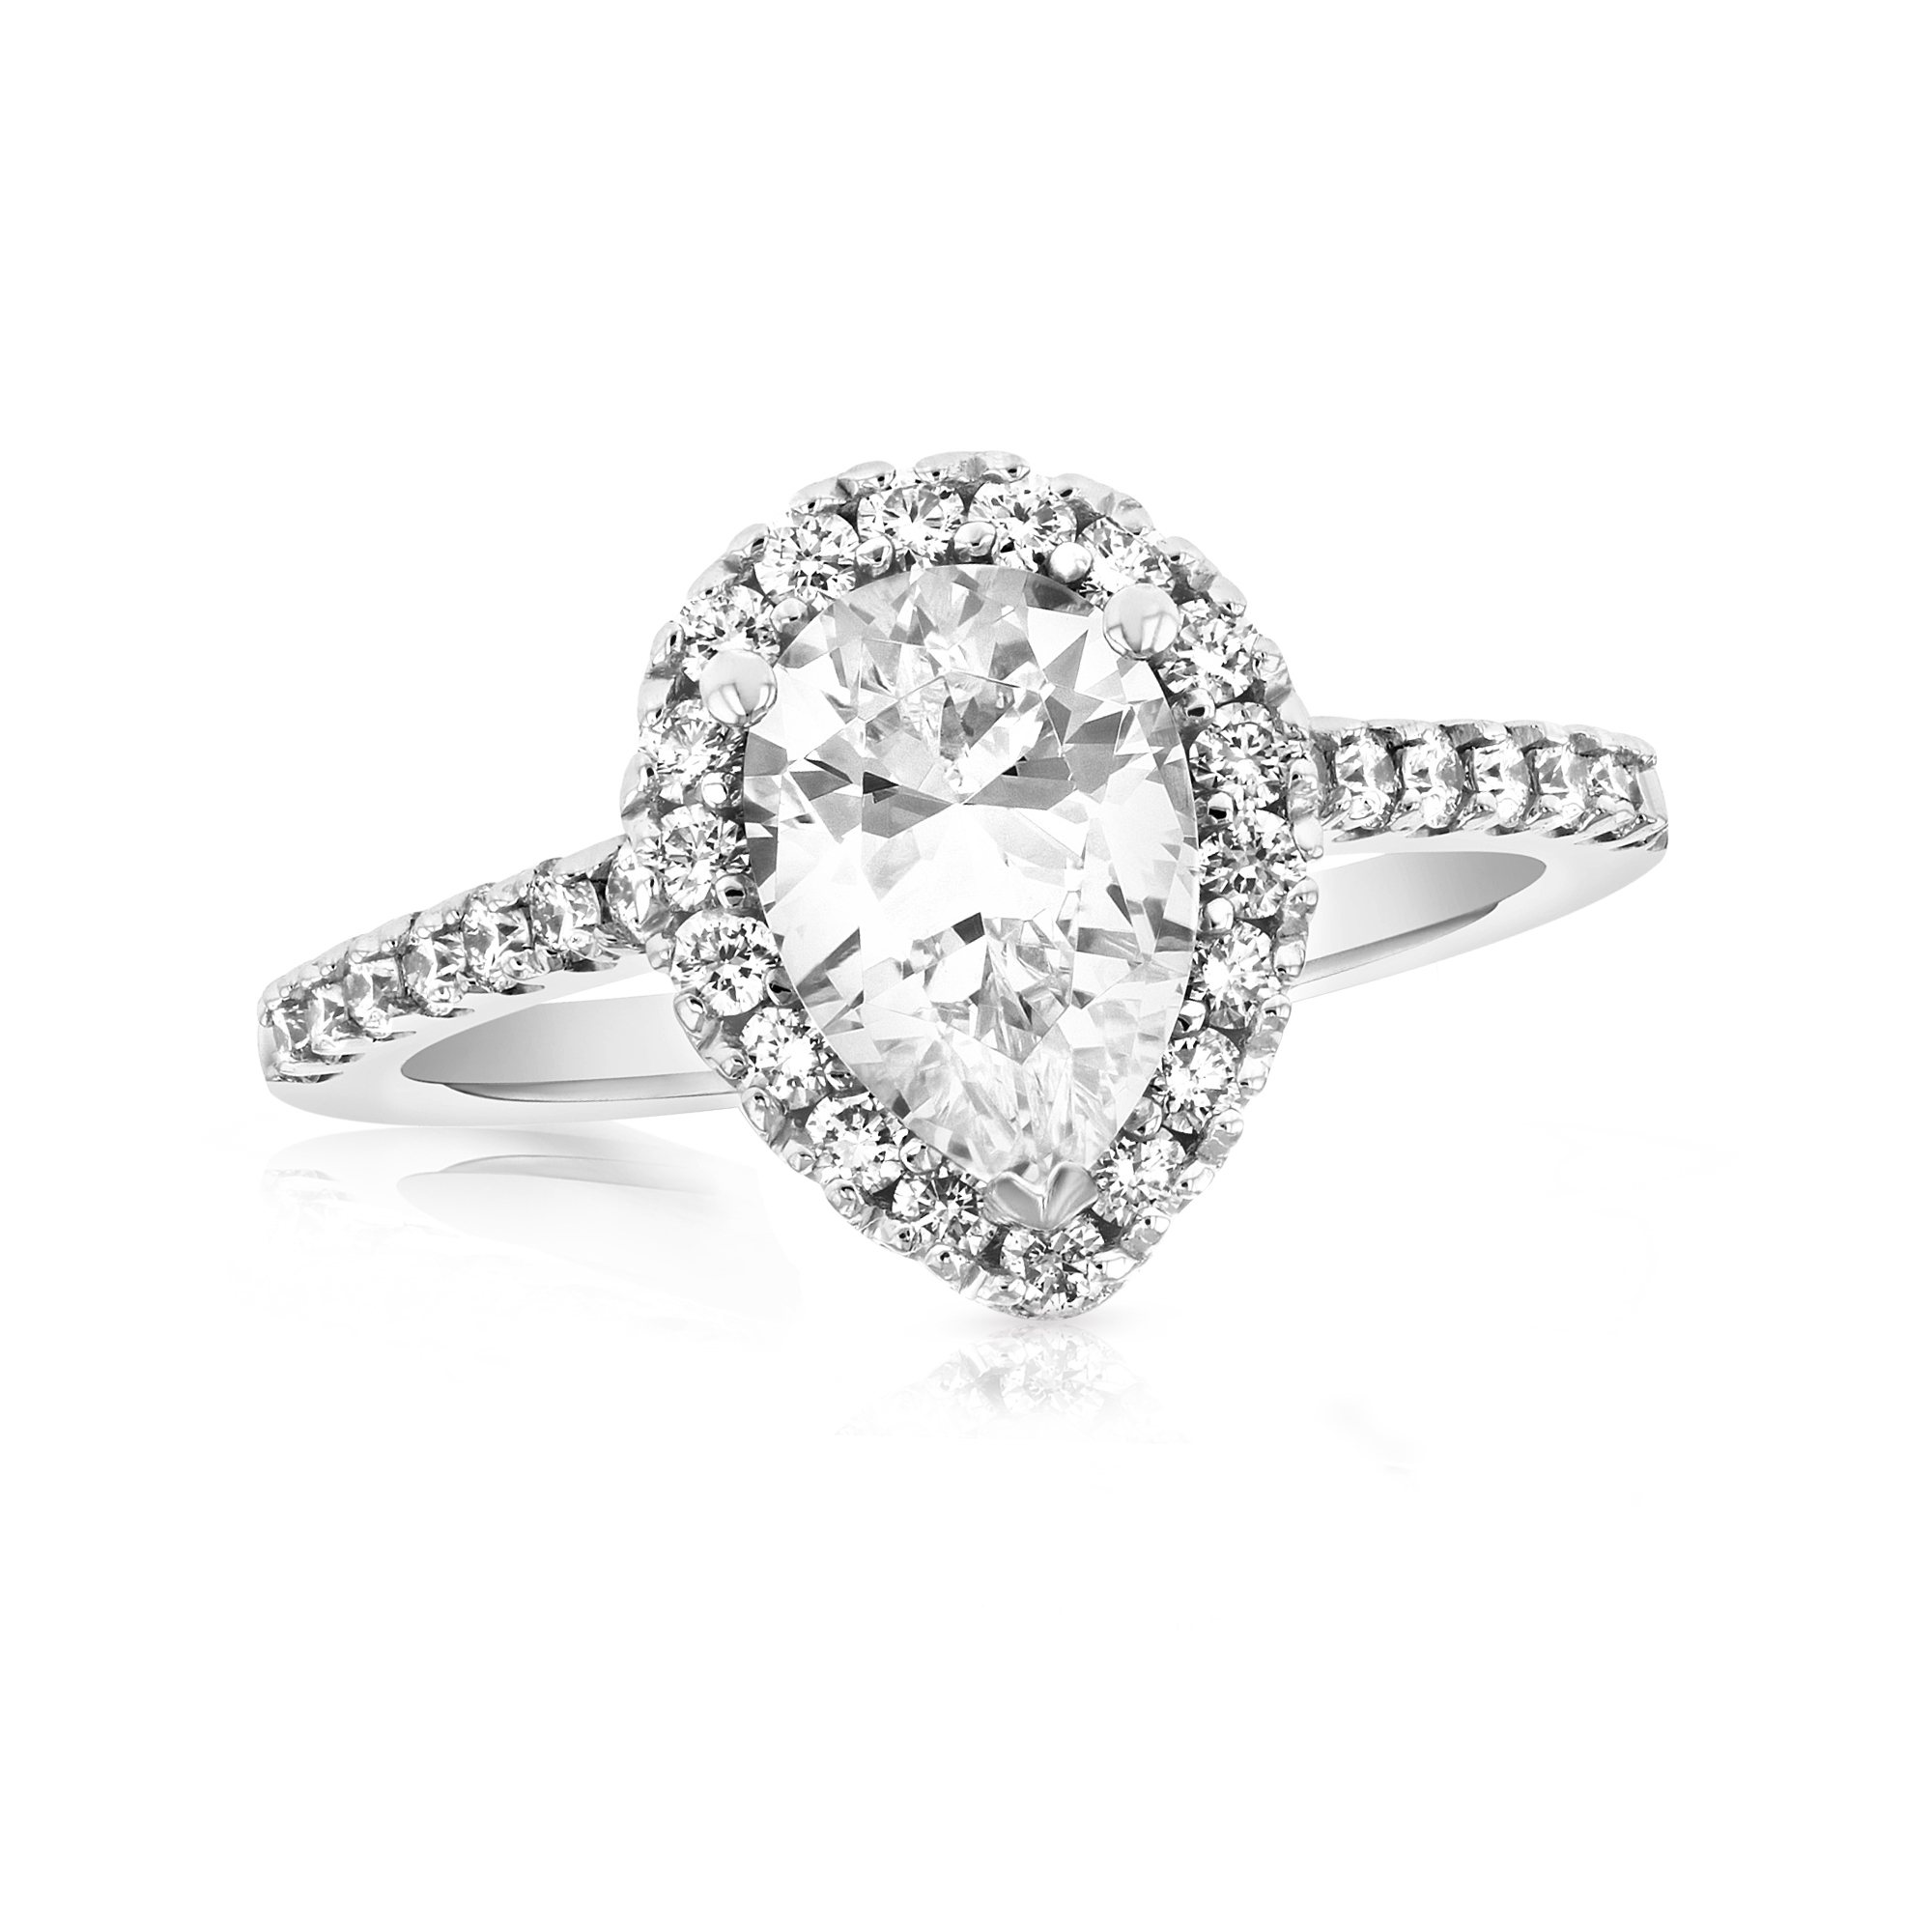 View 0.36ctw Diamond Pear Shaped Halo Semi Mount Ring in 14k White Gold